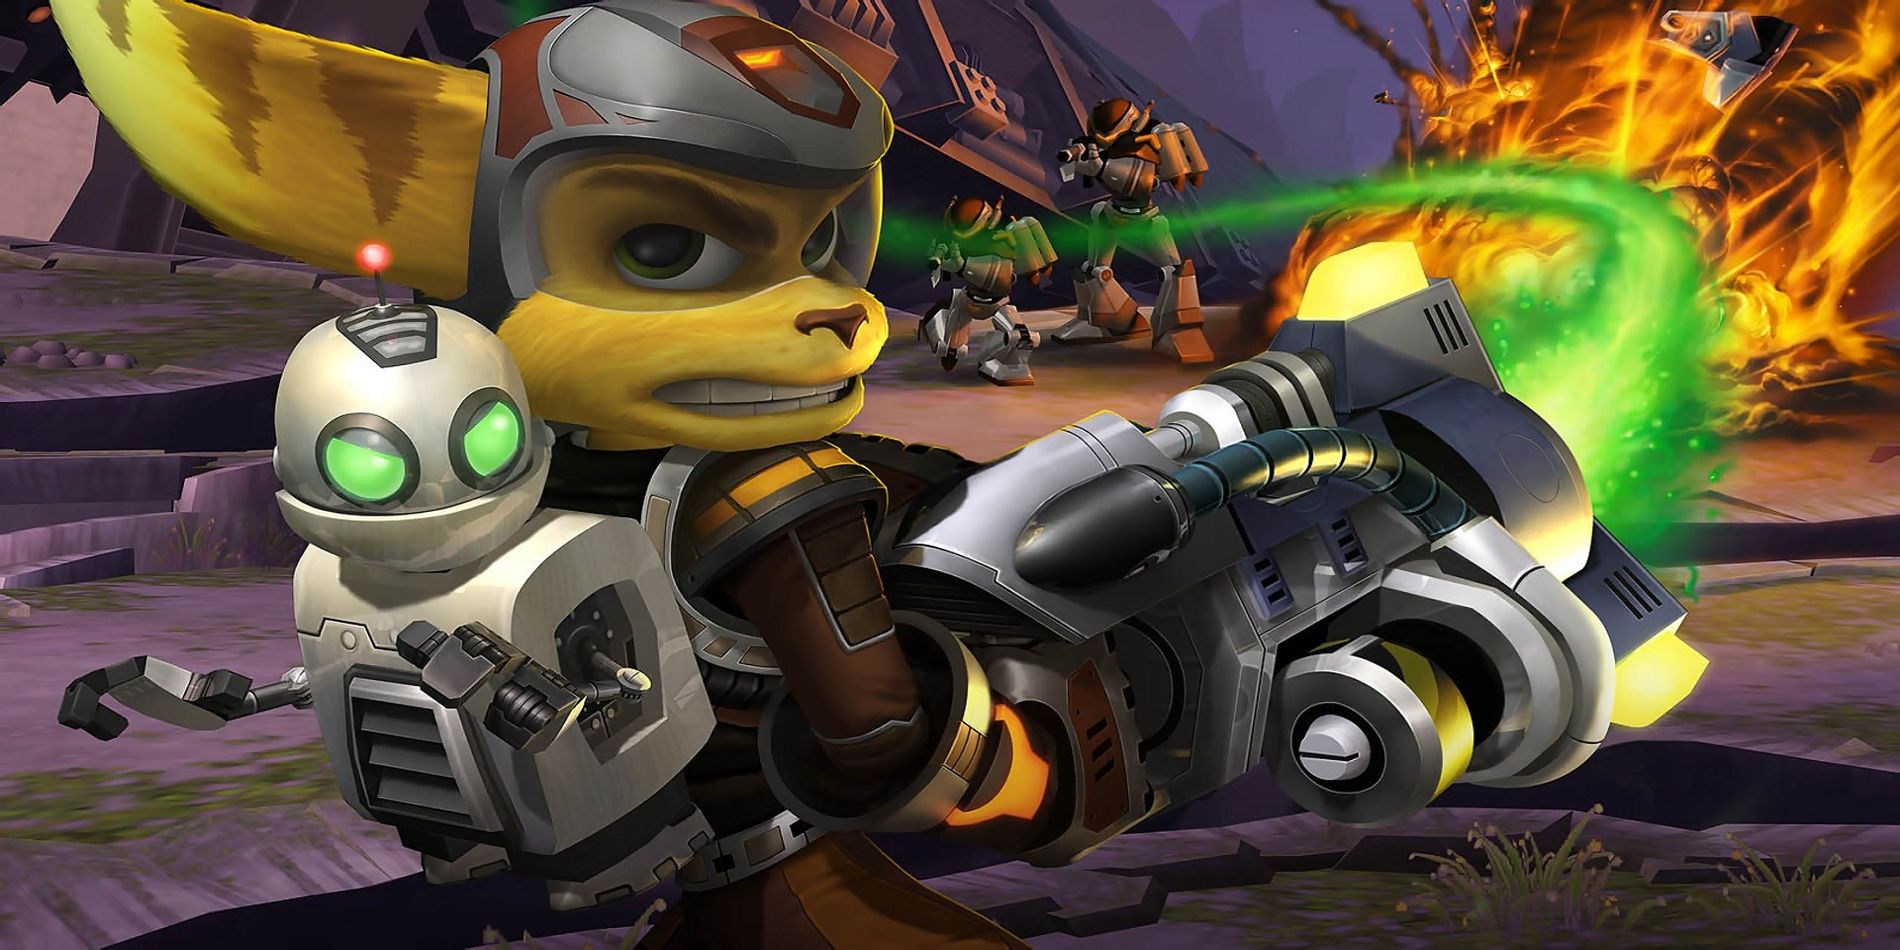 Ratchet & Clank shooting green energy beam at foes